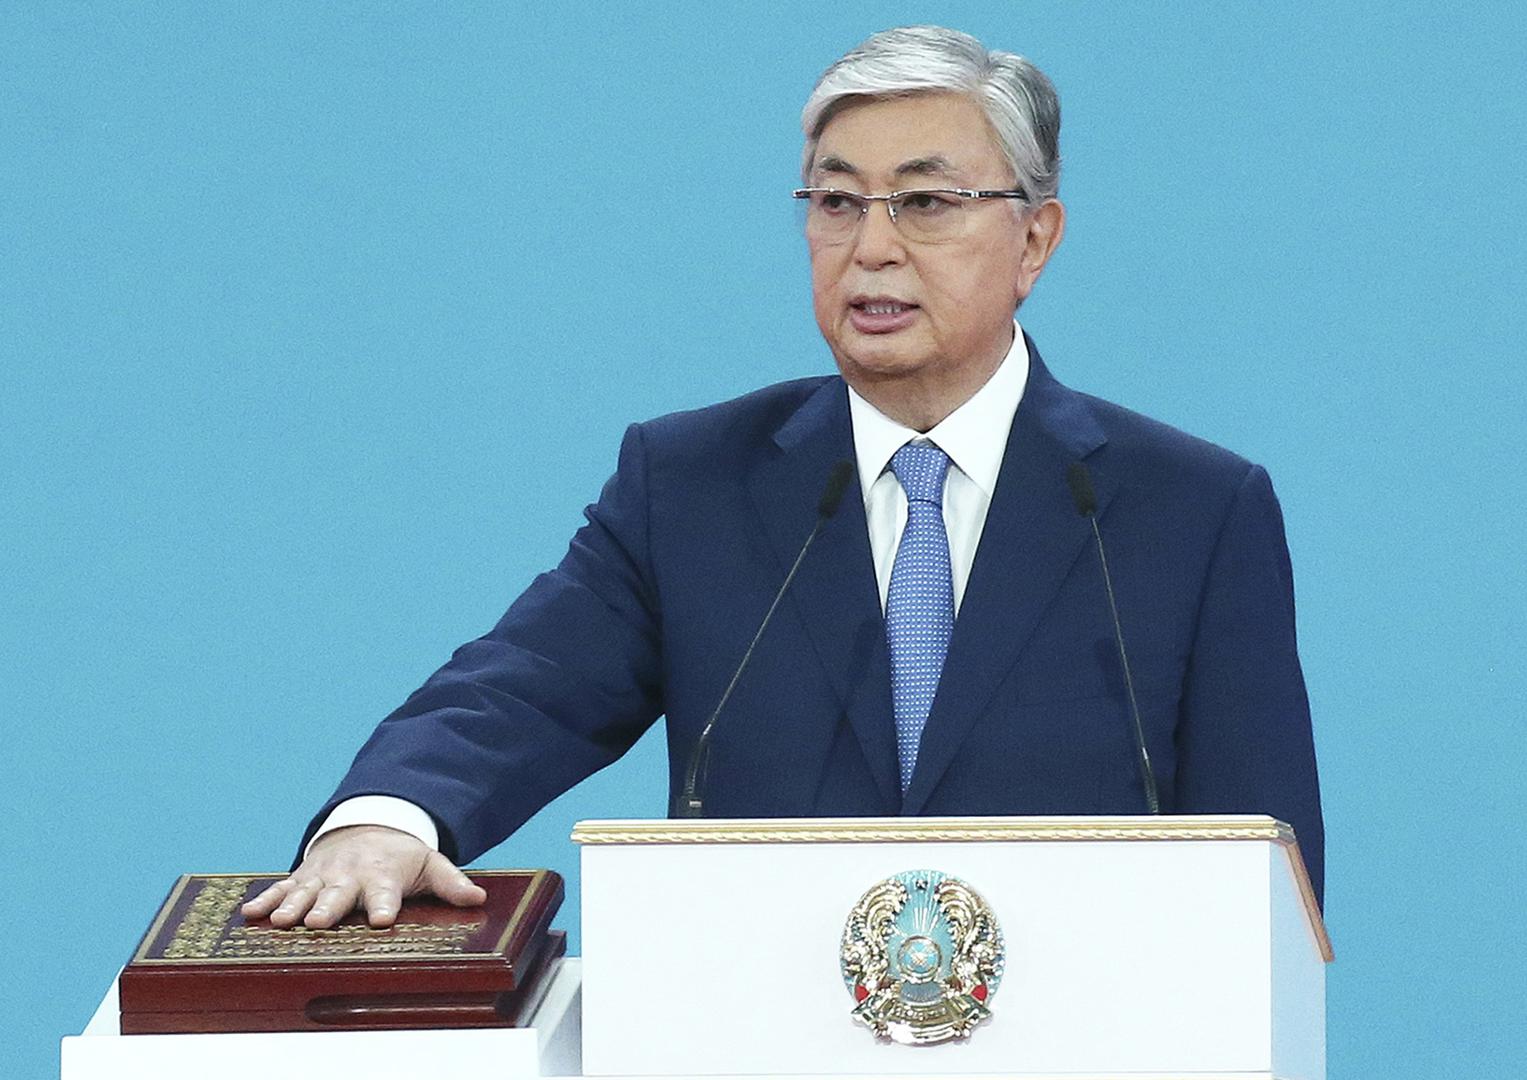 Kazakhstan: Proposal For a Human Rights Reset